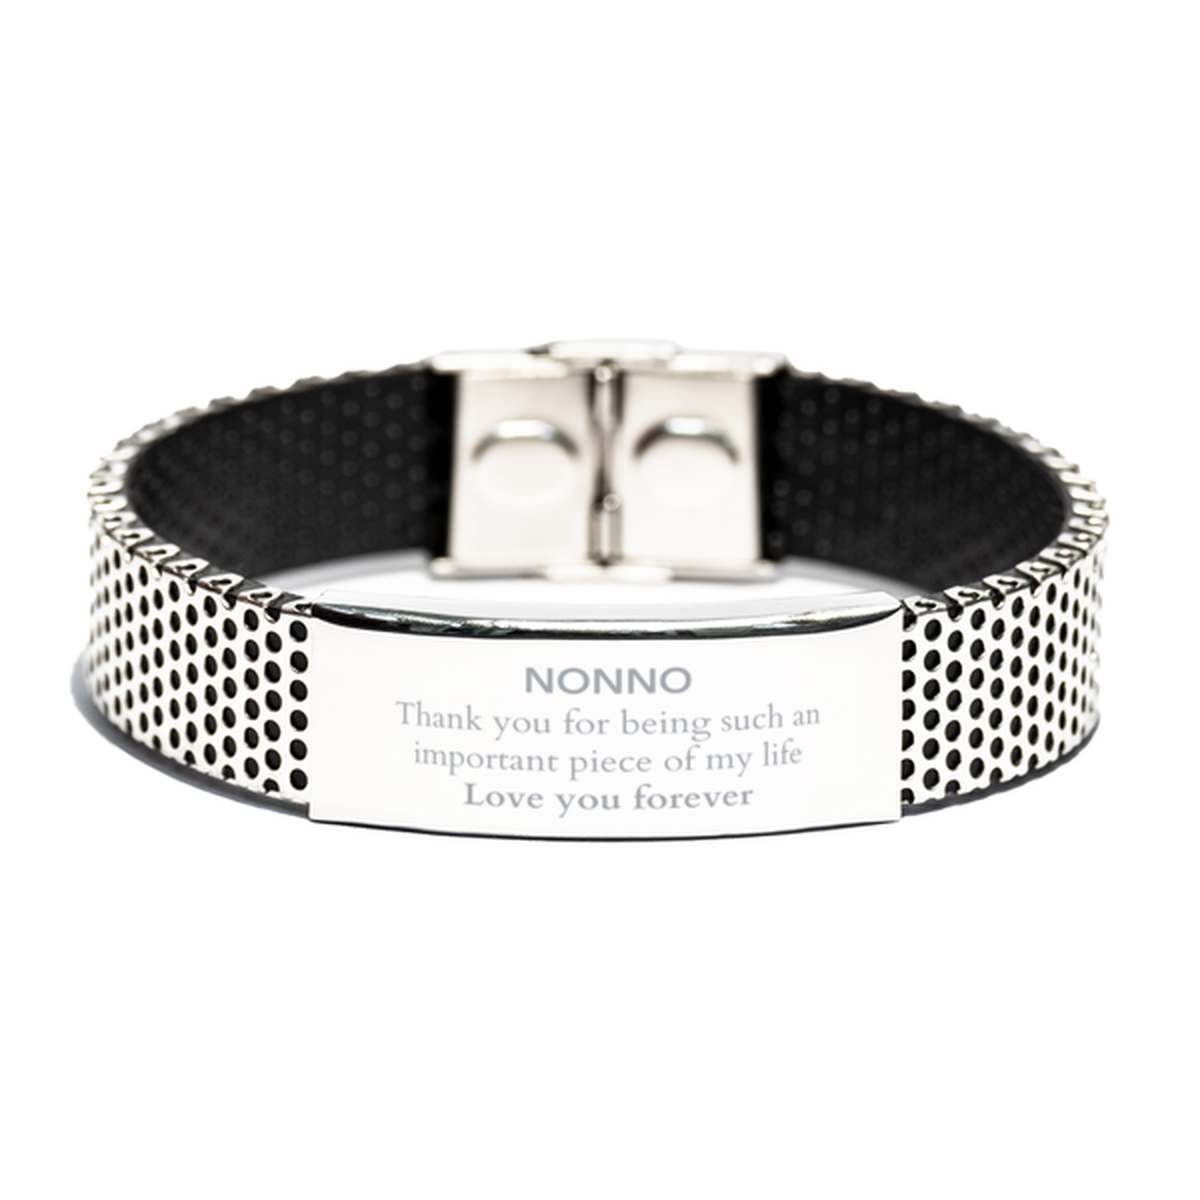 Appropriate Nonno Stainless Steel Bracelet Epic Birthday Gifts for Nonno Thank you for being such an important piece of my life Nonno Christmas Mothers Fathers Day